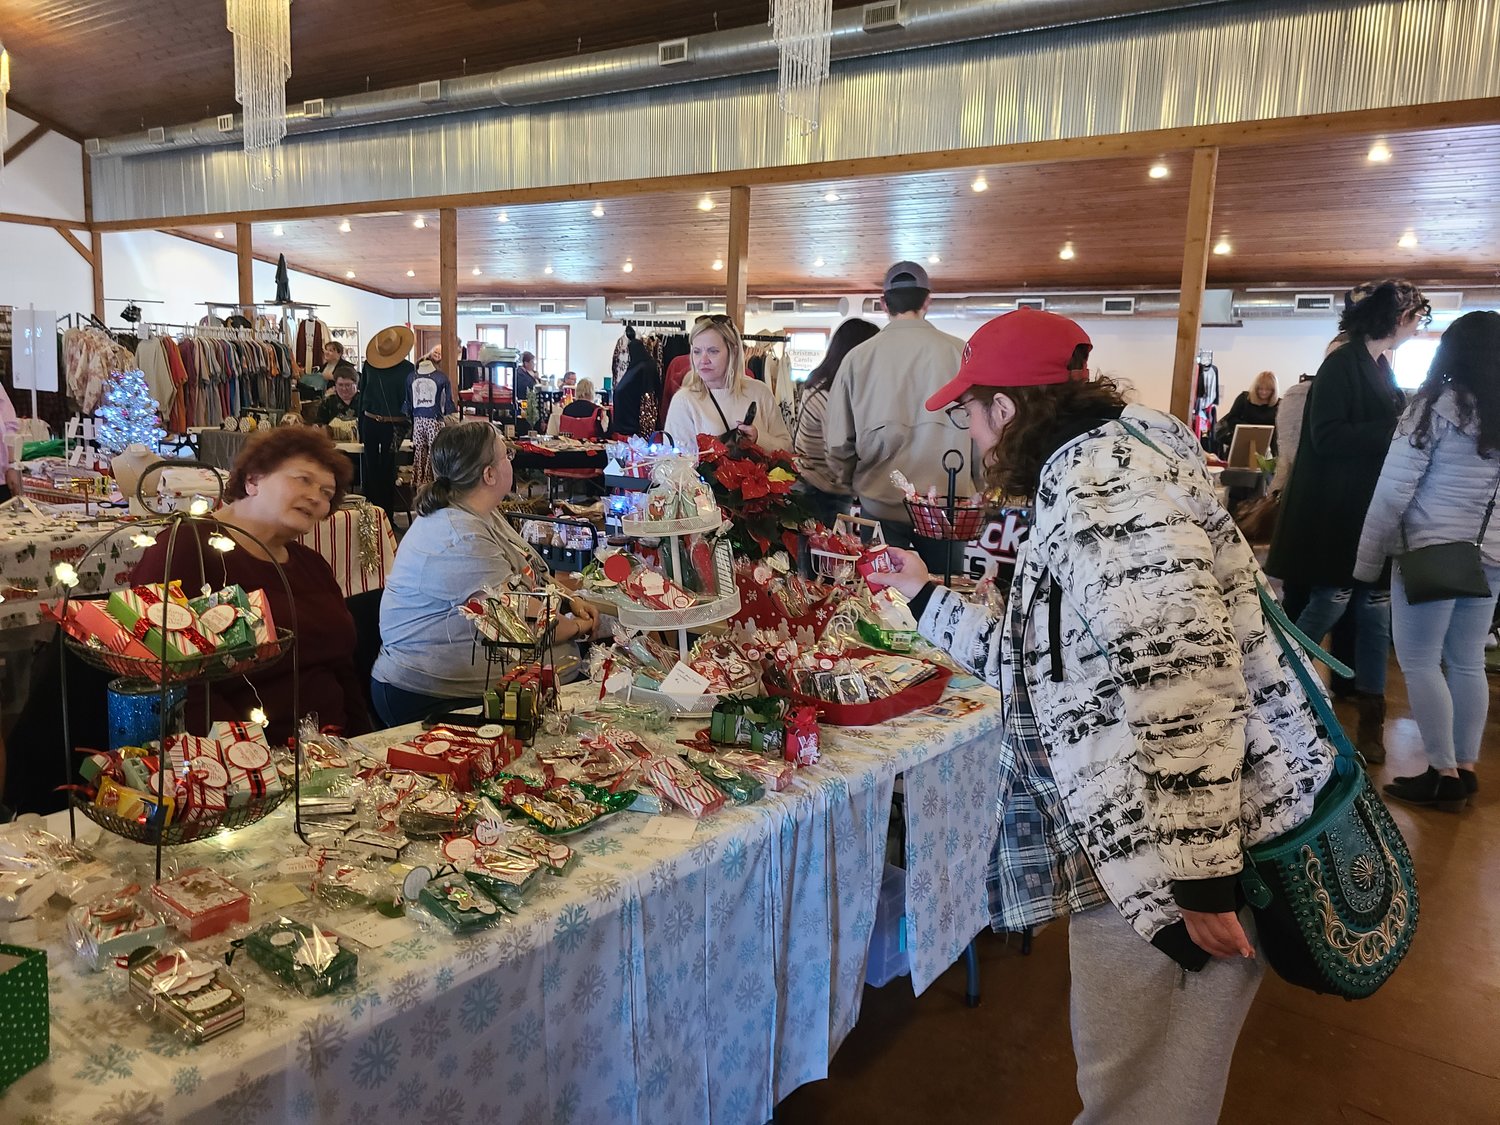 Buyers bustled to the Barn at Timber Cove to shop for Christmas must-haves at the annual Holiday Market on Saturday. Crafters and makers offered a selection of items ranging from fruit wine to handmade ornaments, t-shirts, bath products, dolls, baked goods, jewelry and much more.